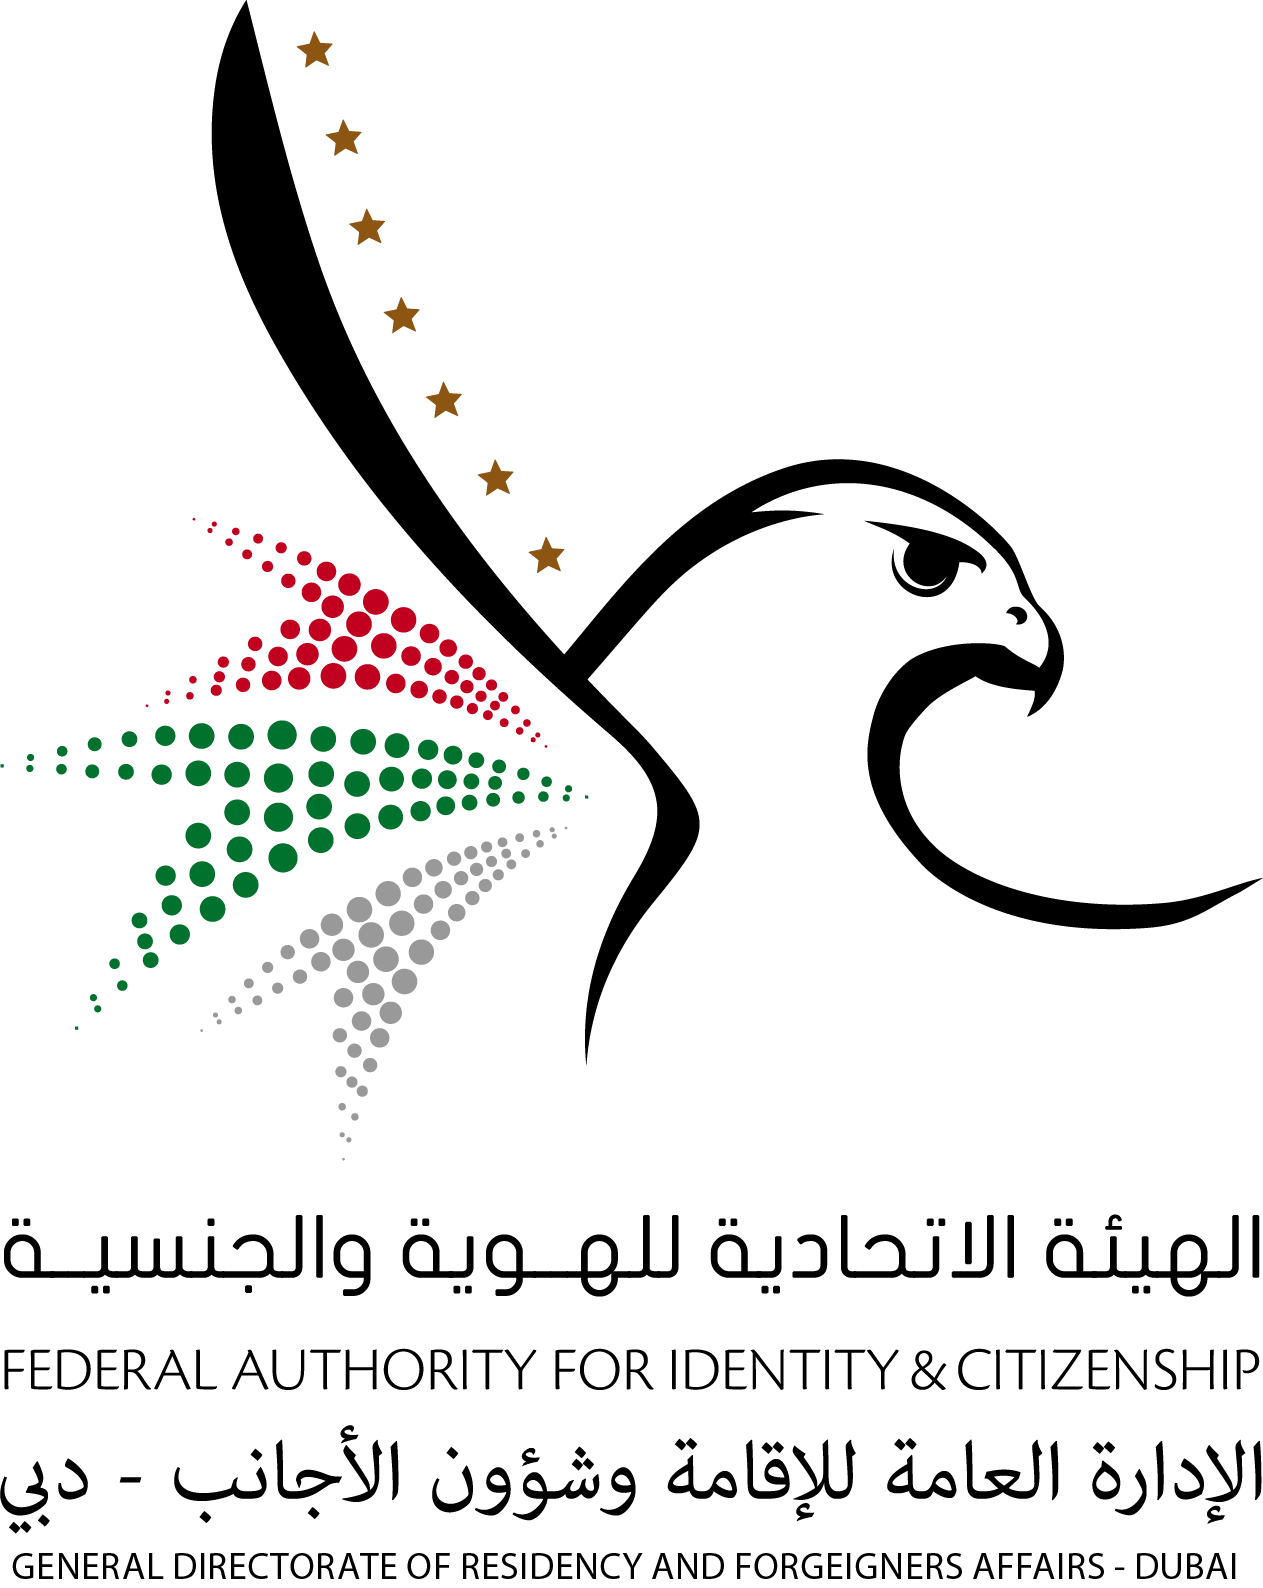 UAE General Directorate of Residency and Foreign Affairs logo.